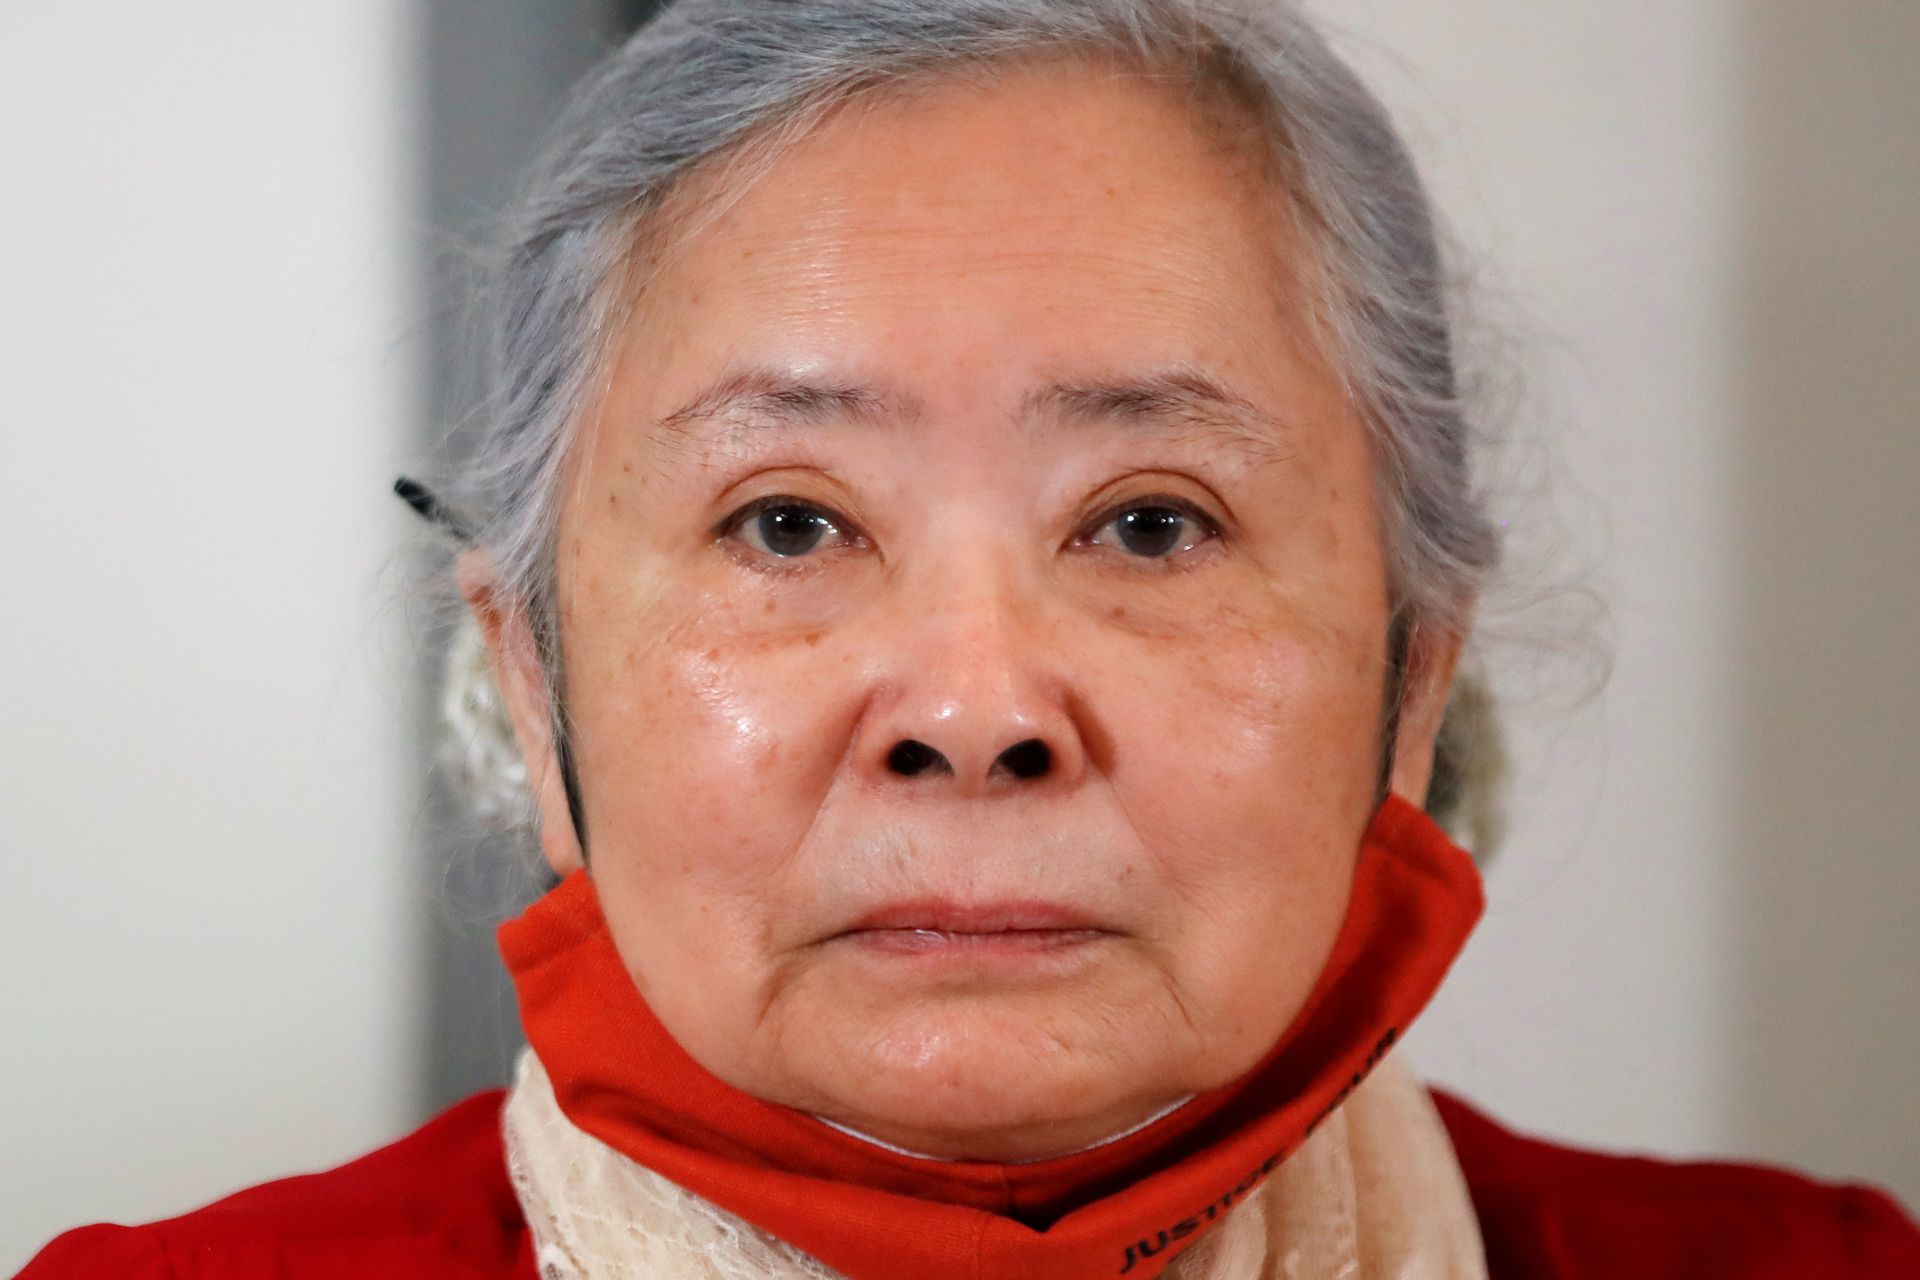 Woman fights on for damages over use of 'Agent Orange' in war in Vietnam